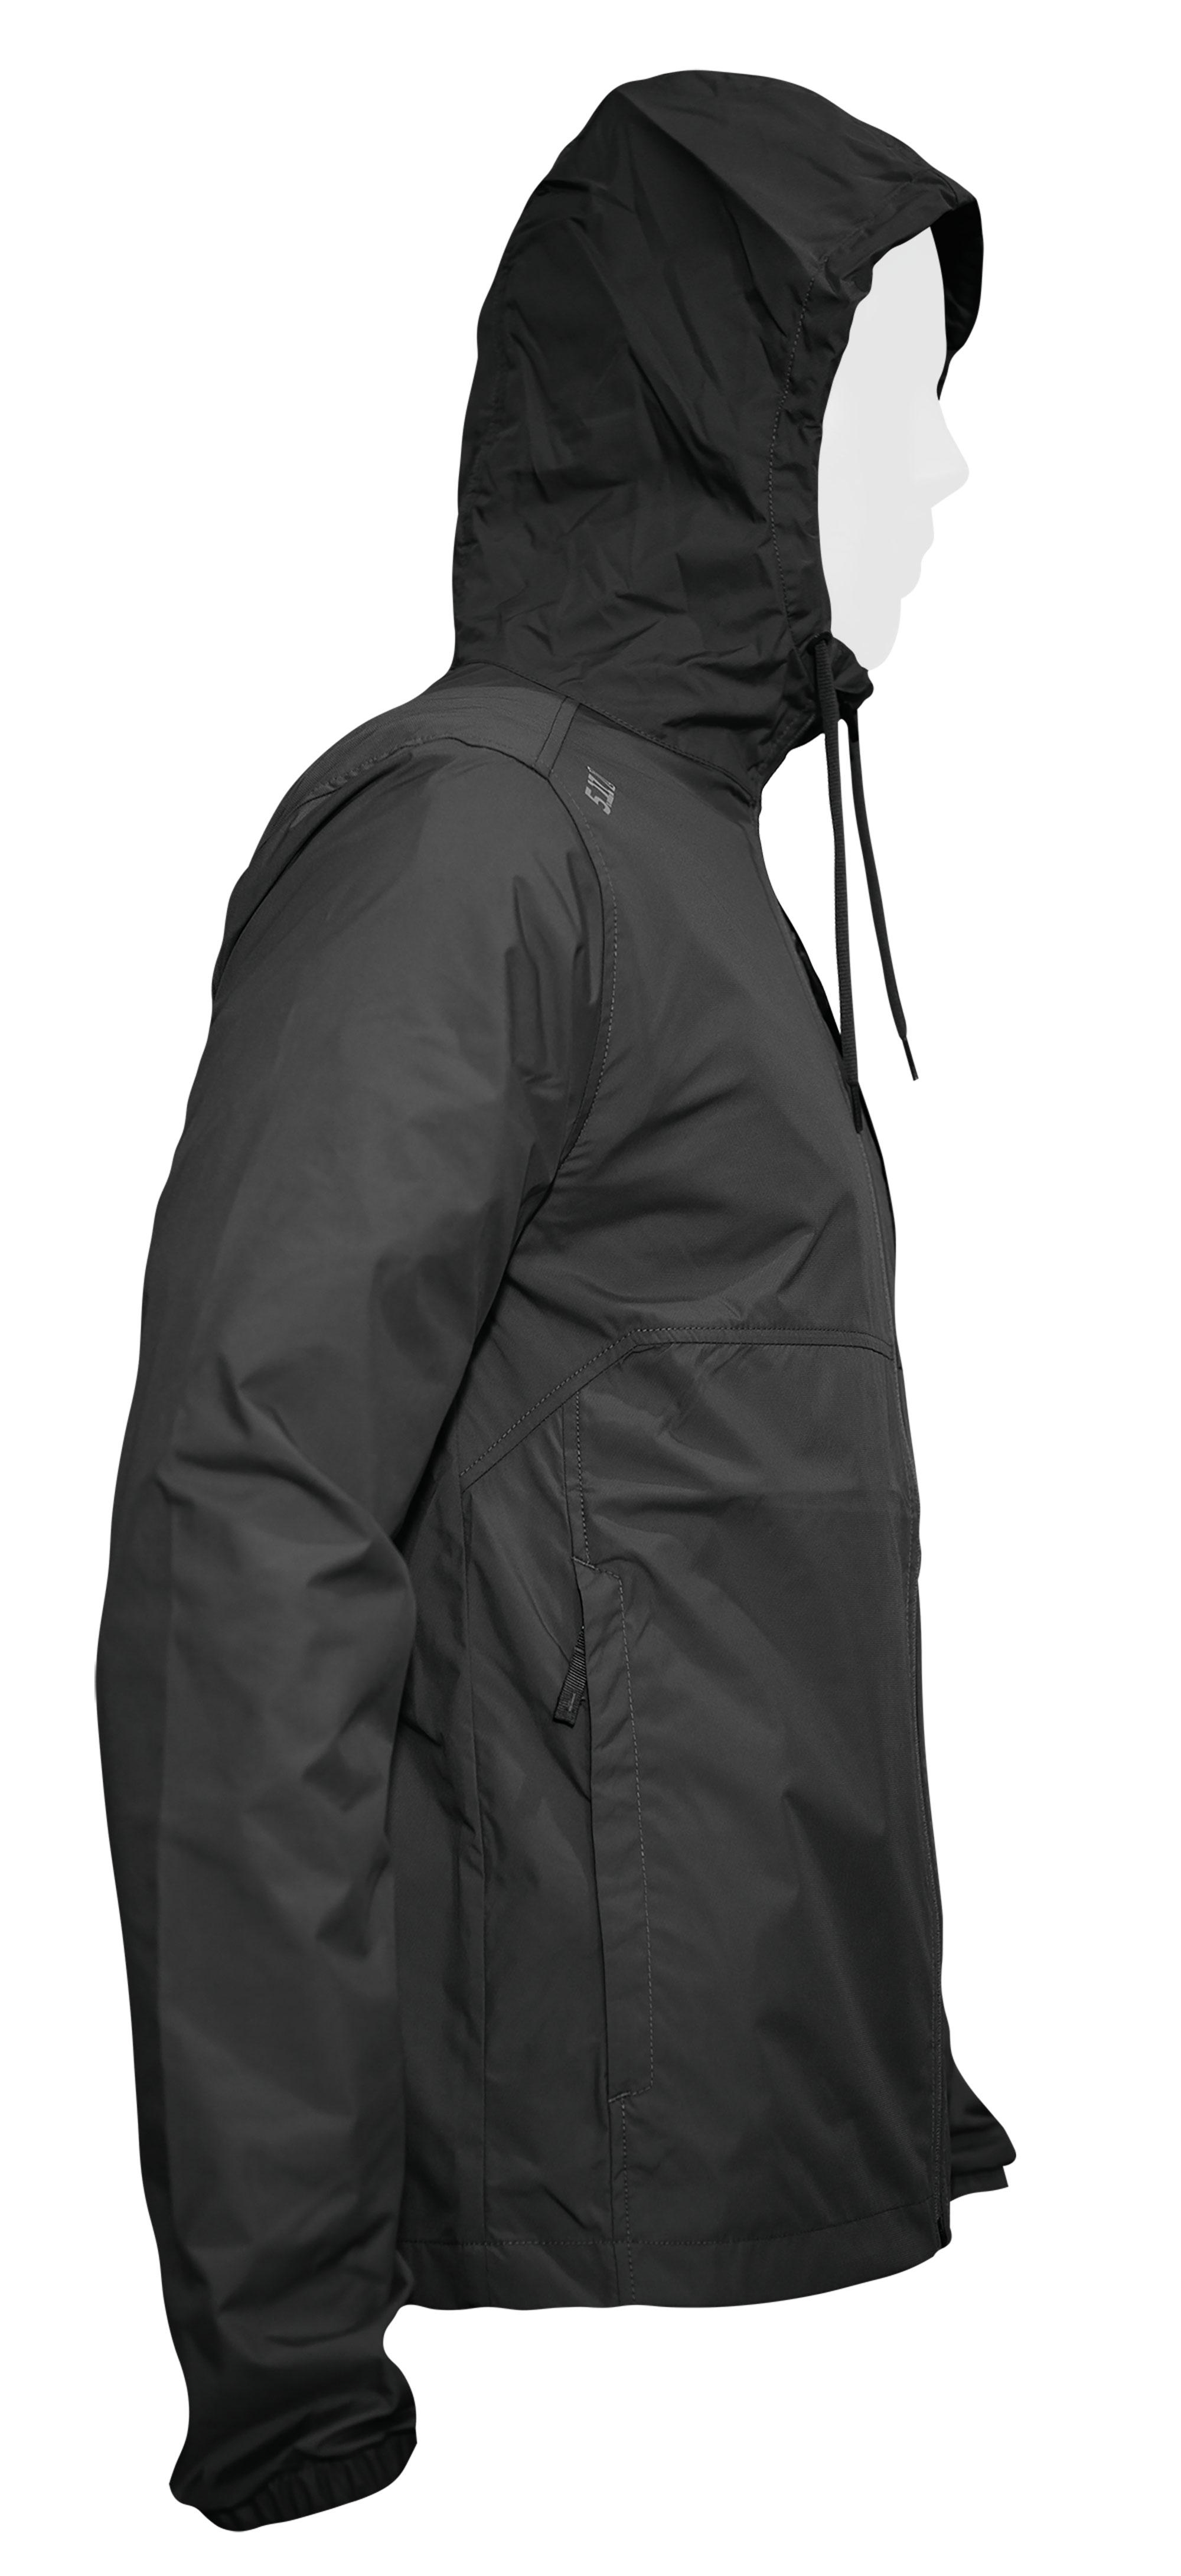 5.11 Tactical Radar Packable Hooded Jacket | Recon Company